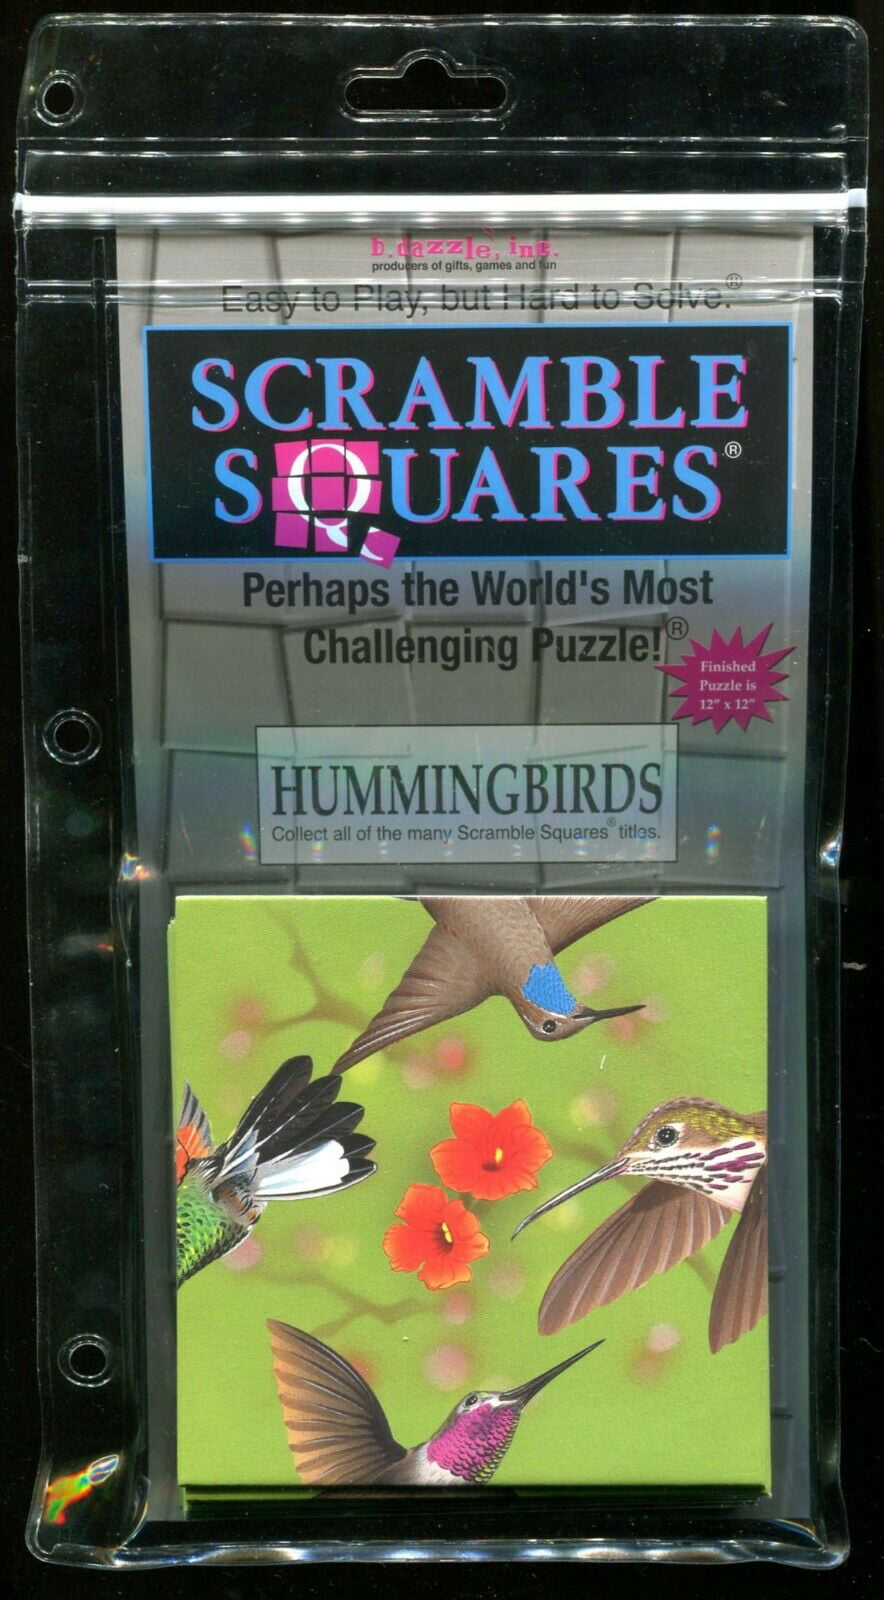 Scramble Squares Worlds Most Challenging 9 Piece Puzzle Roosters for sale online 